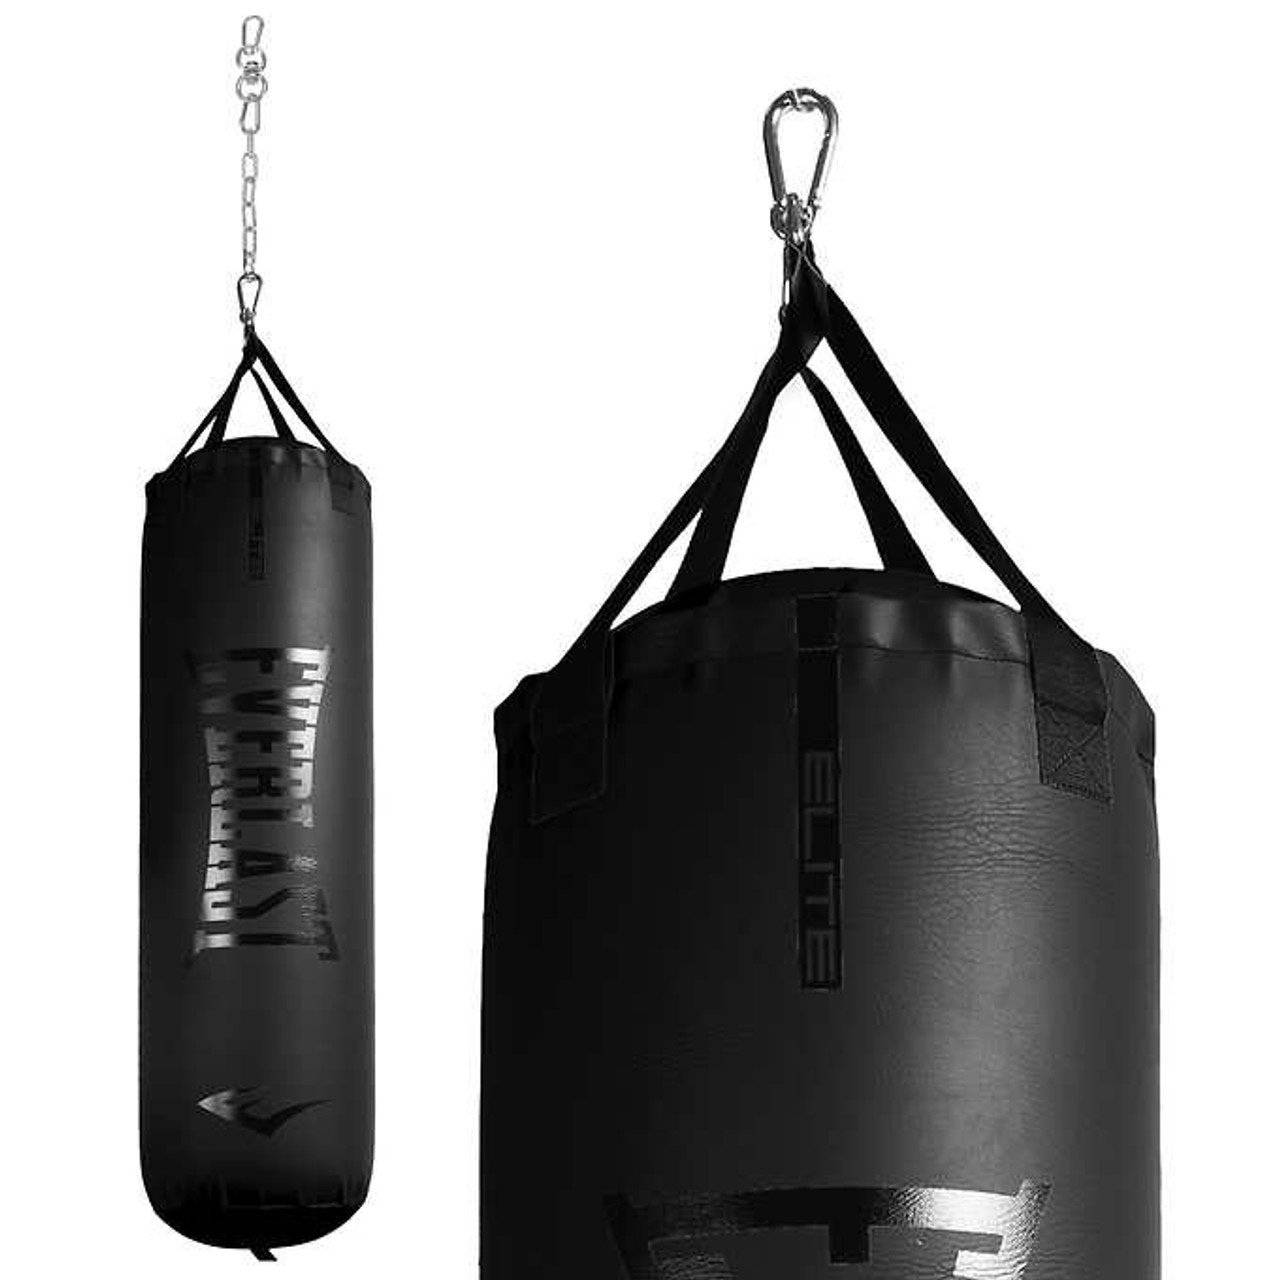 Everlast 100 lb. Heavy Bag, Gloves, and Heavy Bag Hanger Kit - Complete Workout - Chicken Pieces